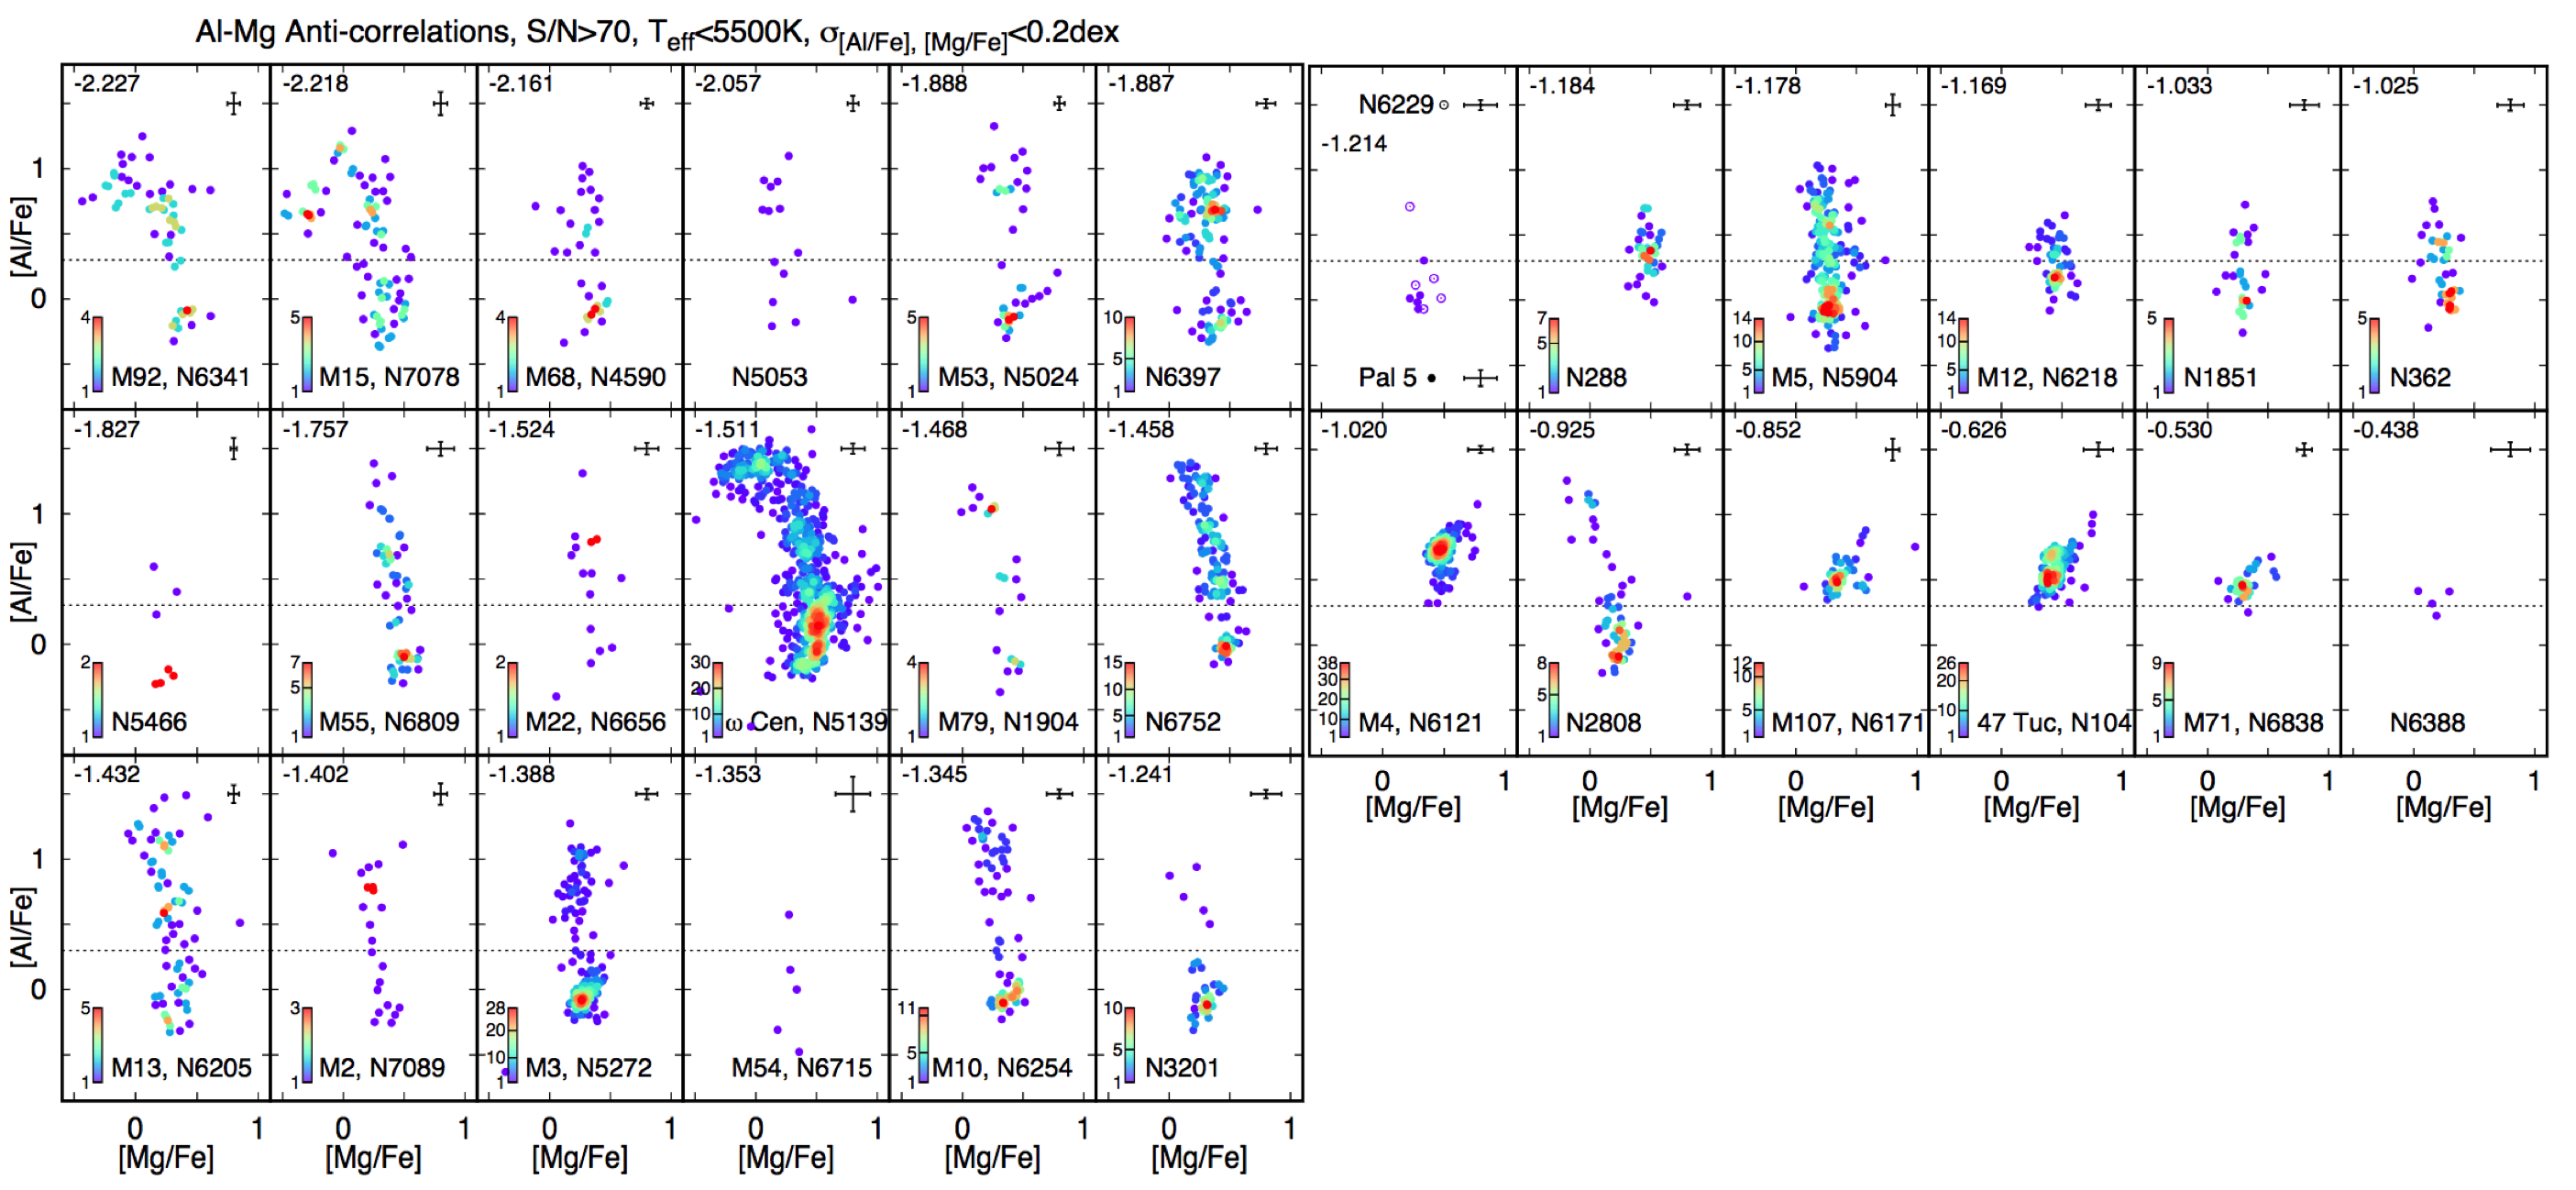 
Anti-correlations in the distribution of [Al/Fe] to [Fe/H] for the 30 globular clusters studied in <a href="https://ui.adsabs.harvard.edu/abs/2020MNRAS.492.1641M/abstract">Meszaros et al. 2020</a>.
